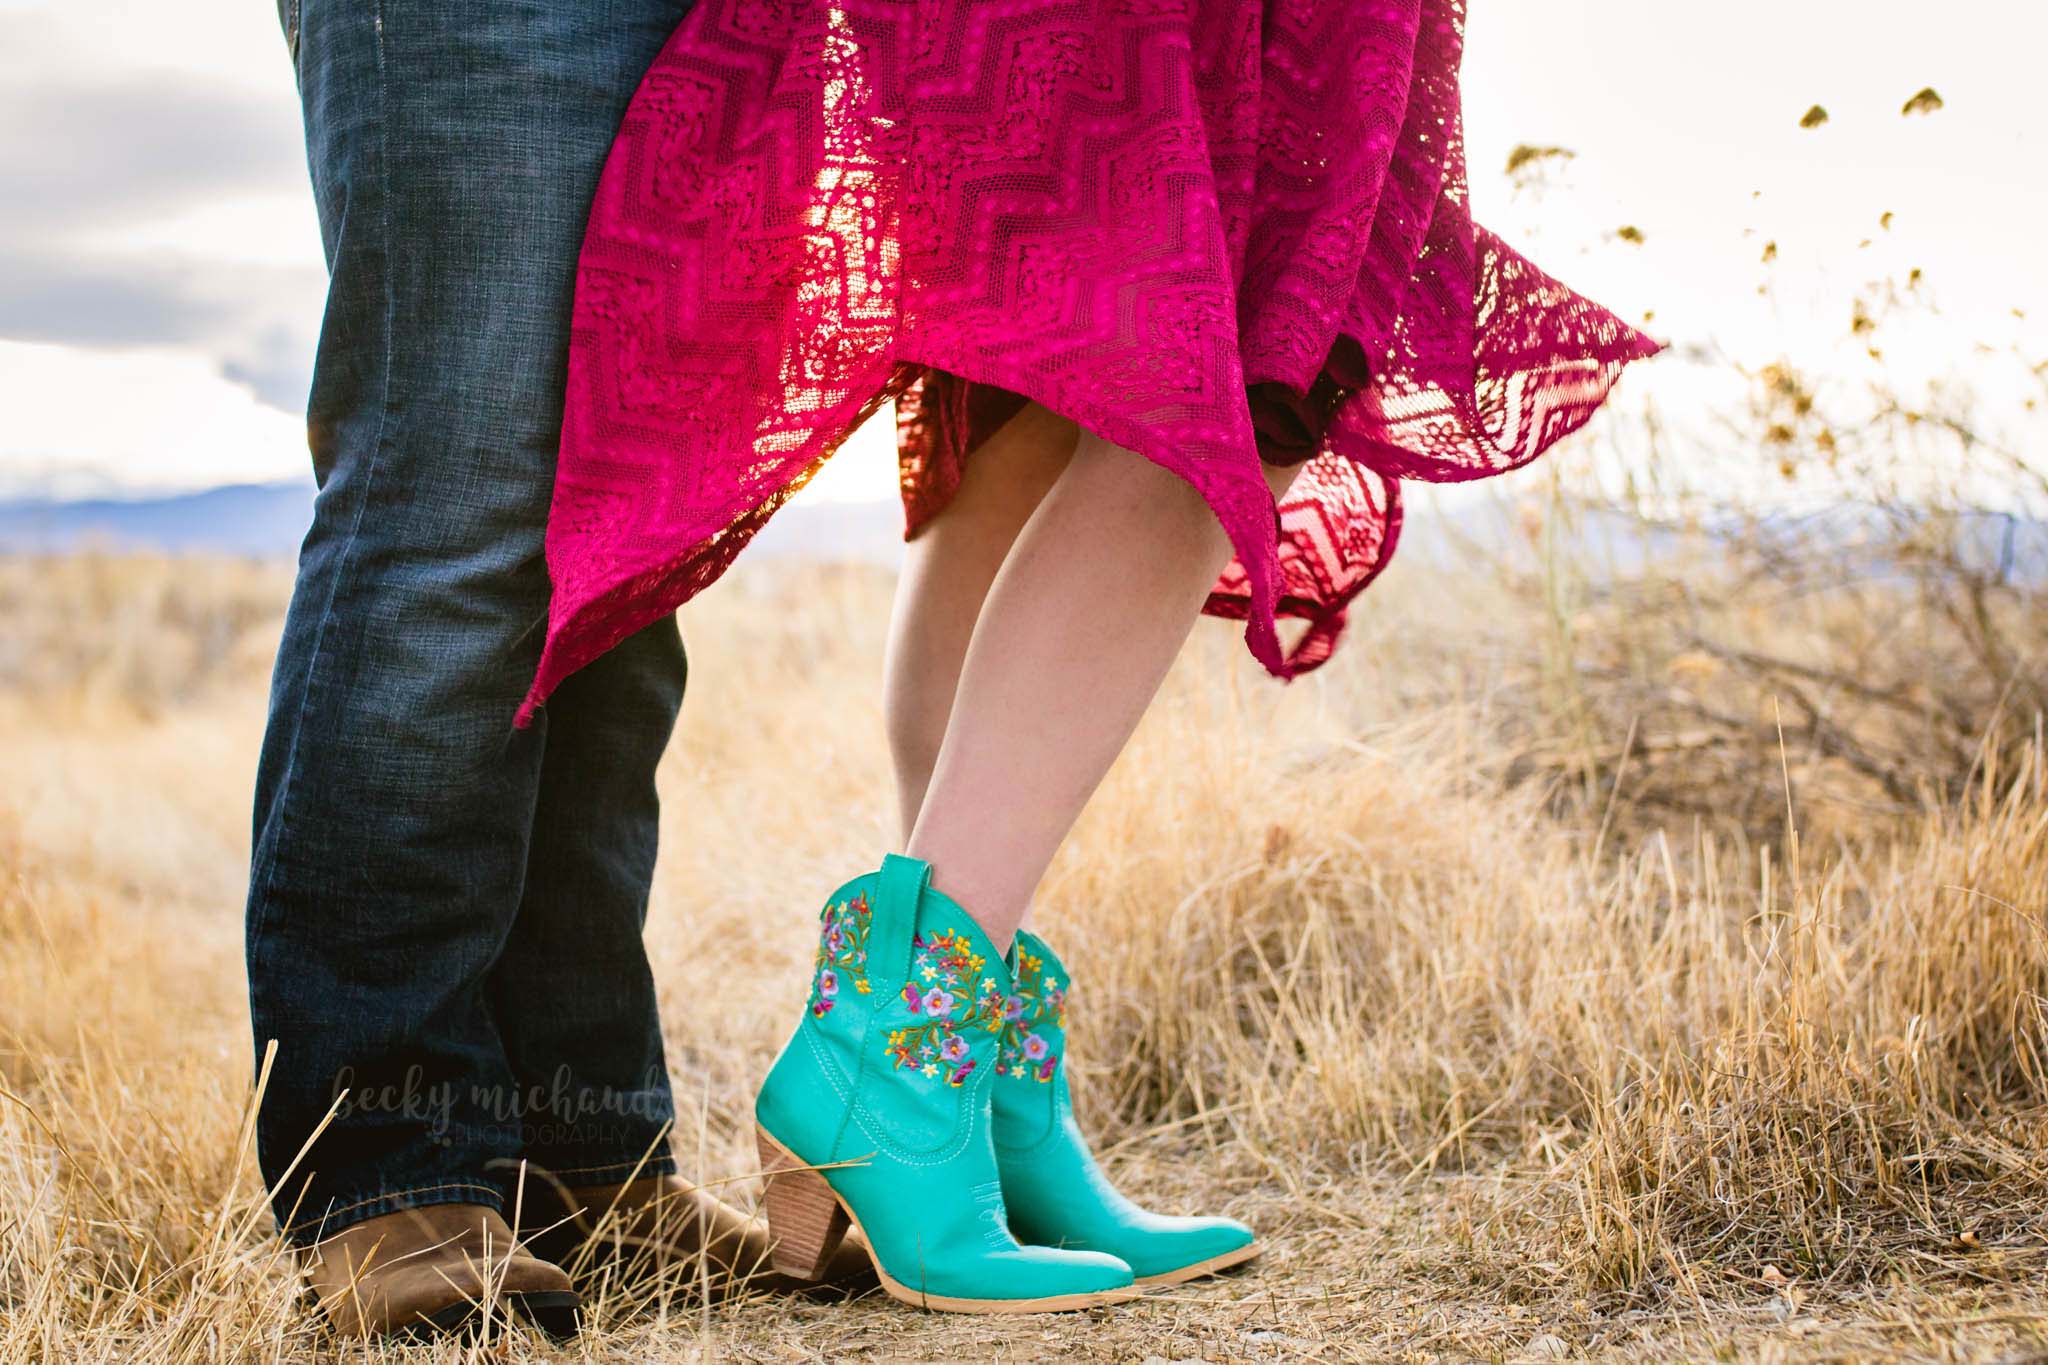 a couple's feet in cowboy boots with skirt blowing in the wind